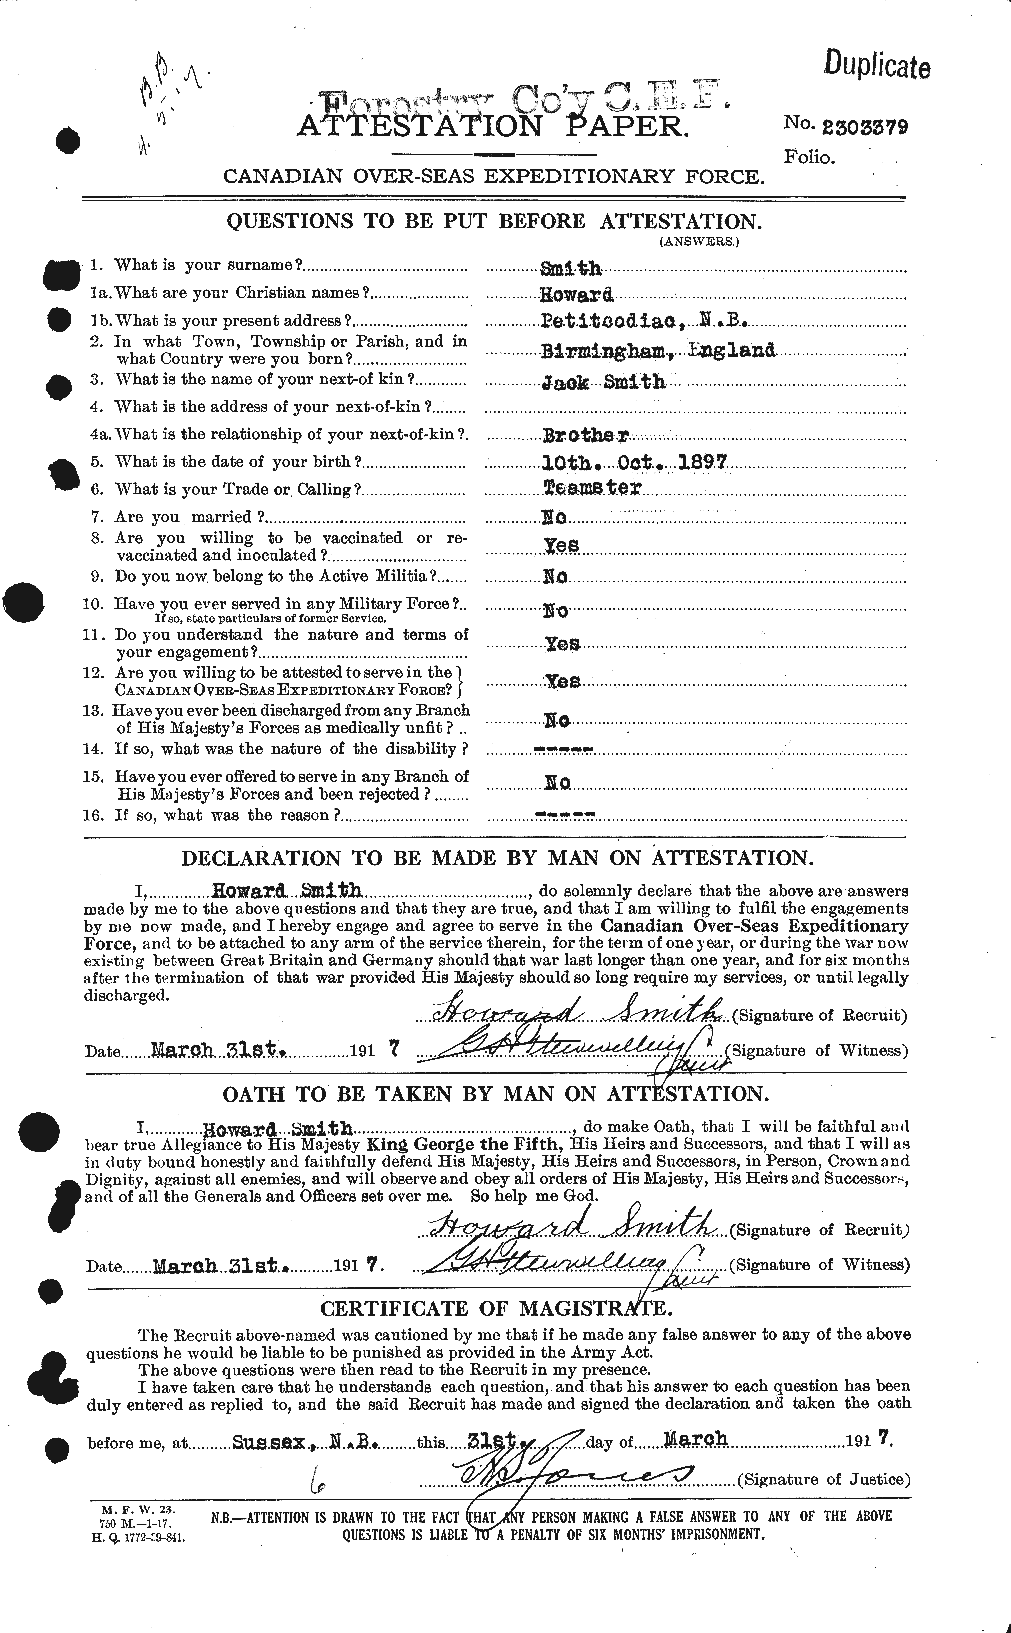 Personnel Records of the First World War - CEF 104568a